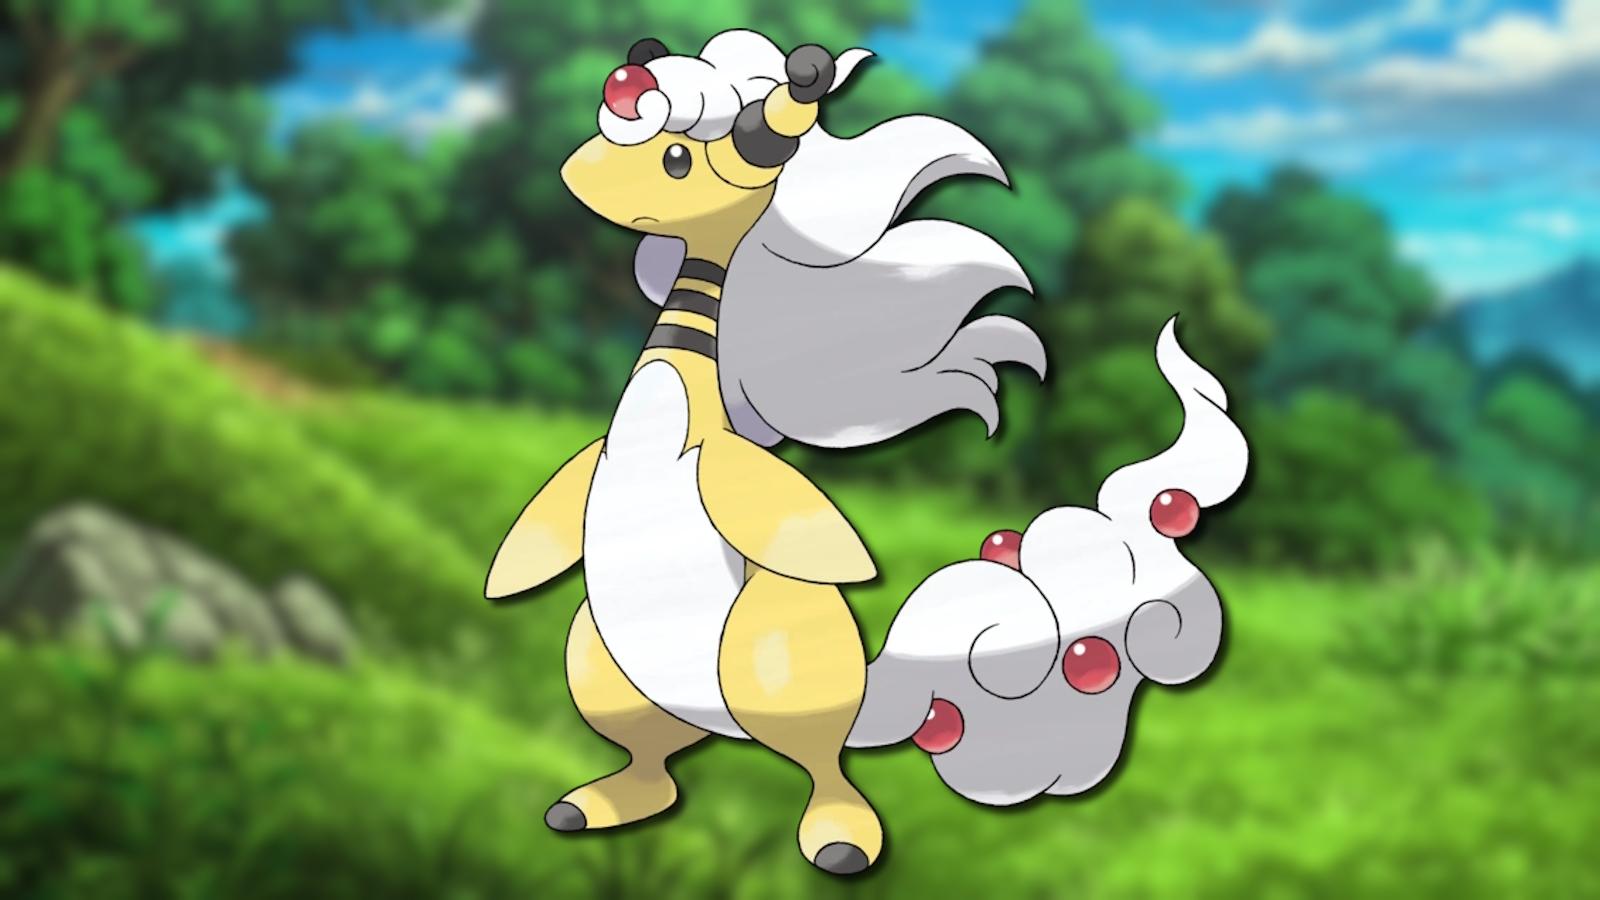 Mega Ampharos standing in front of field from Pokemon anime.